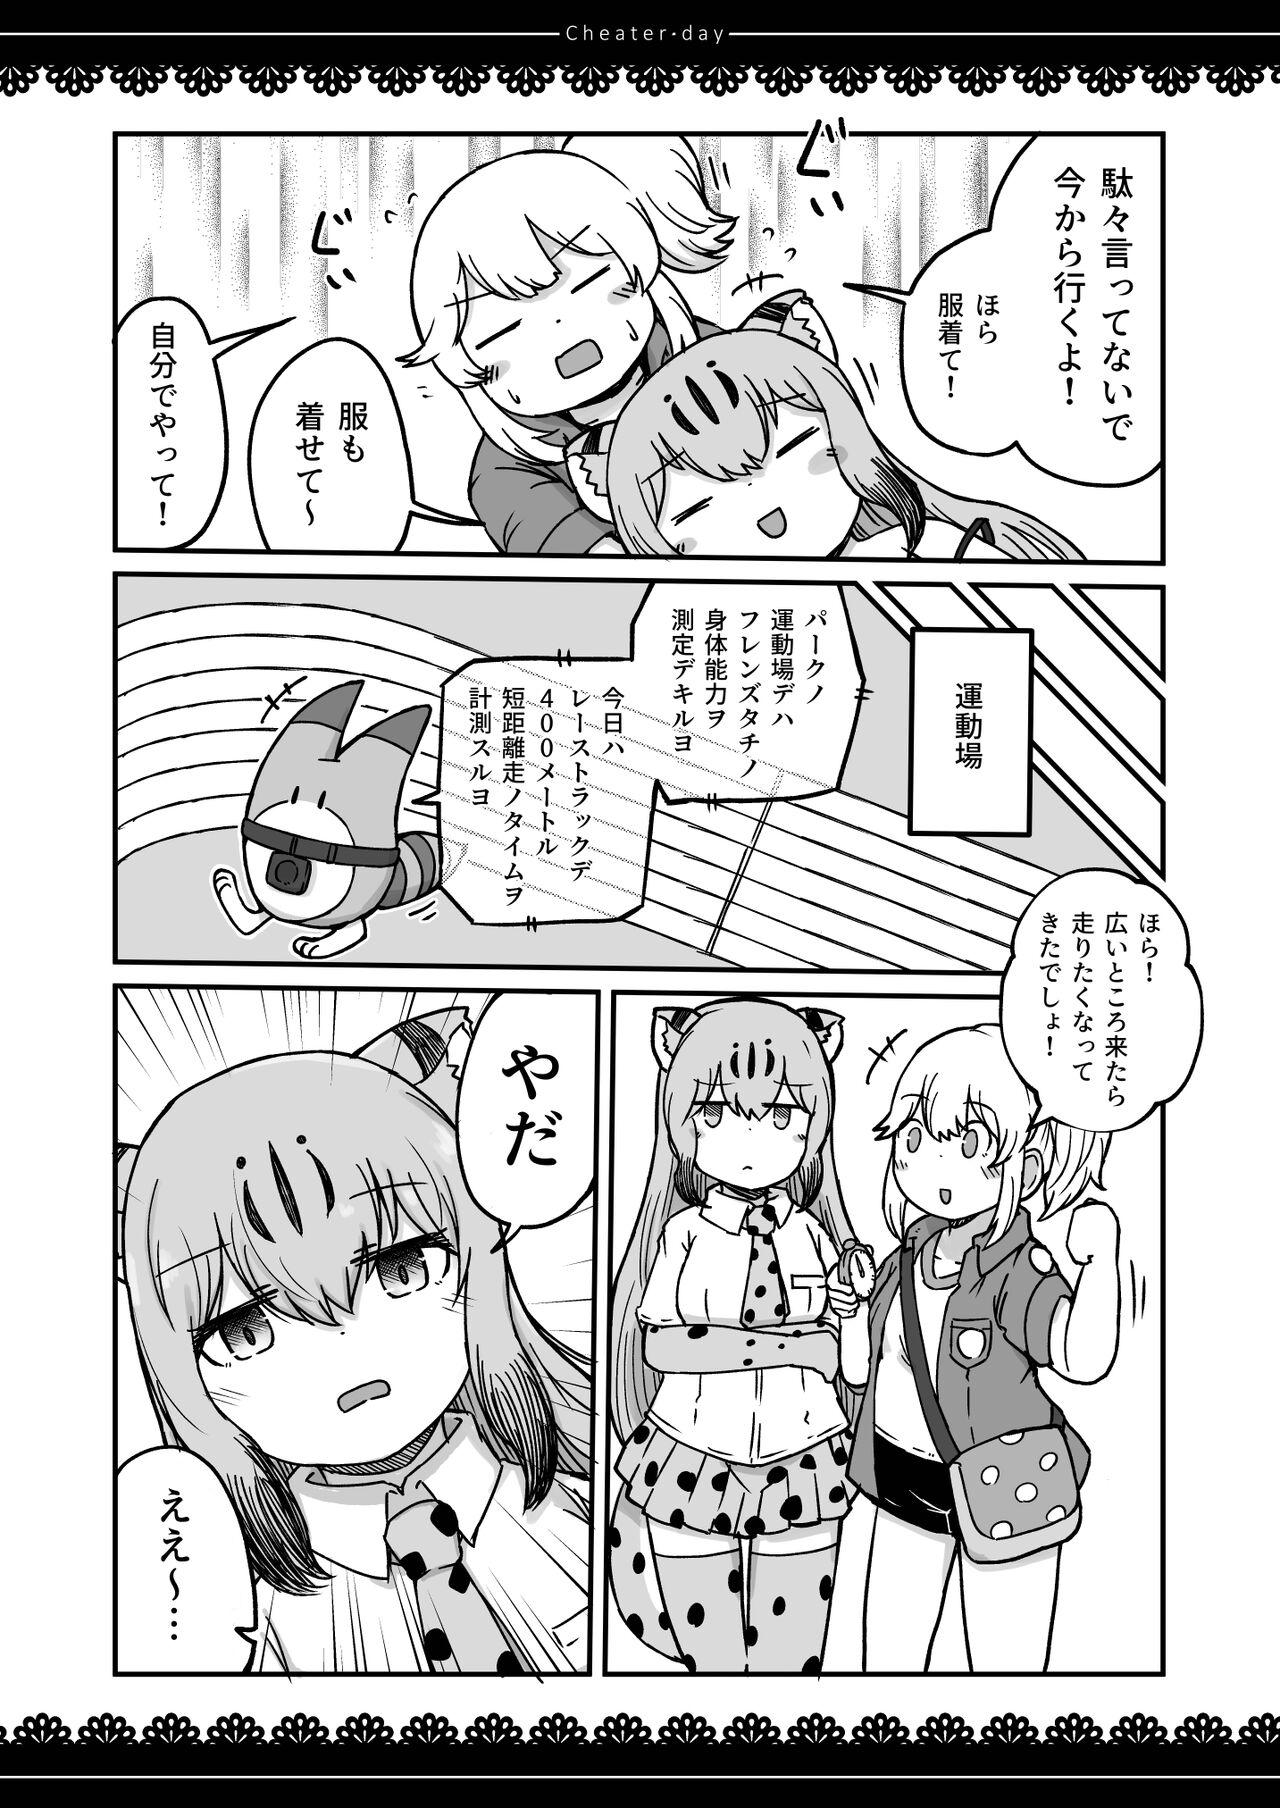 Master Cheater day - Kemono friends Amateur Teen - Page 9